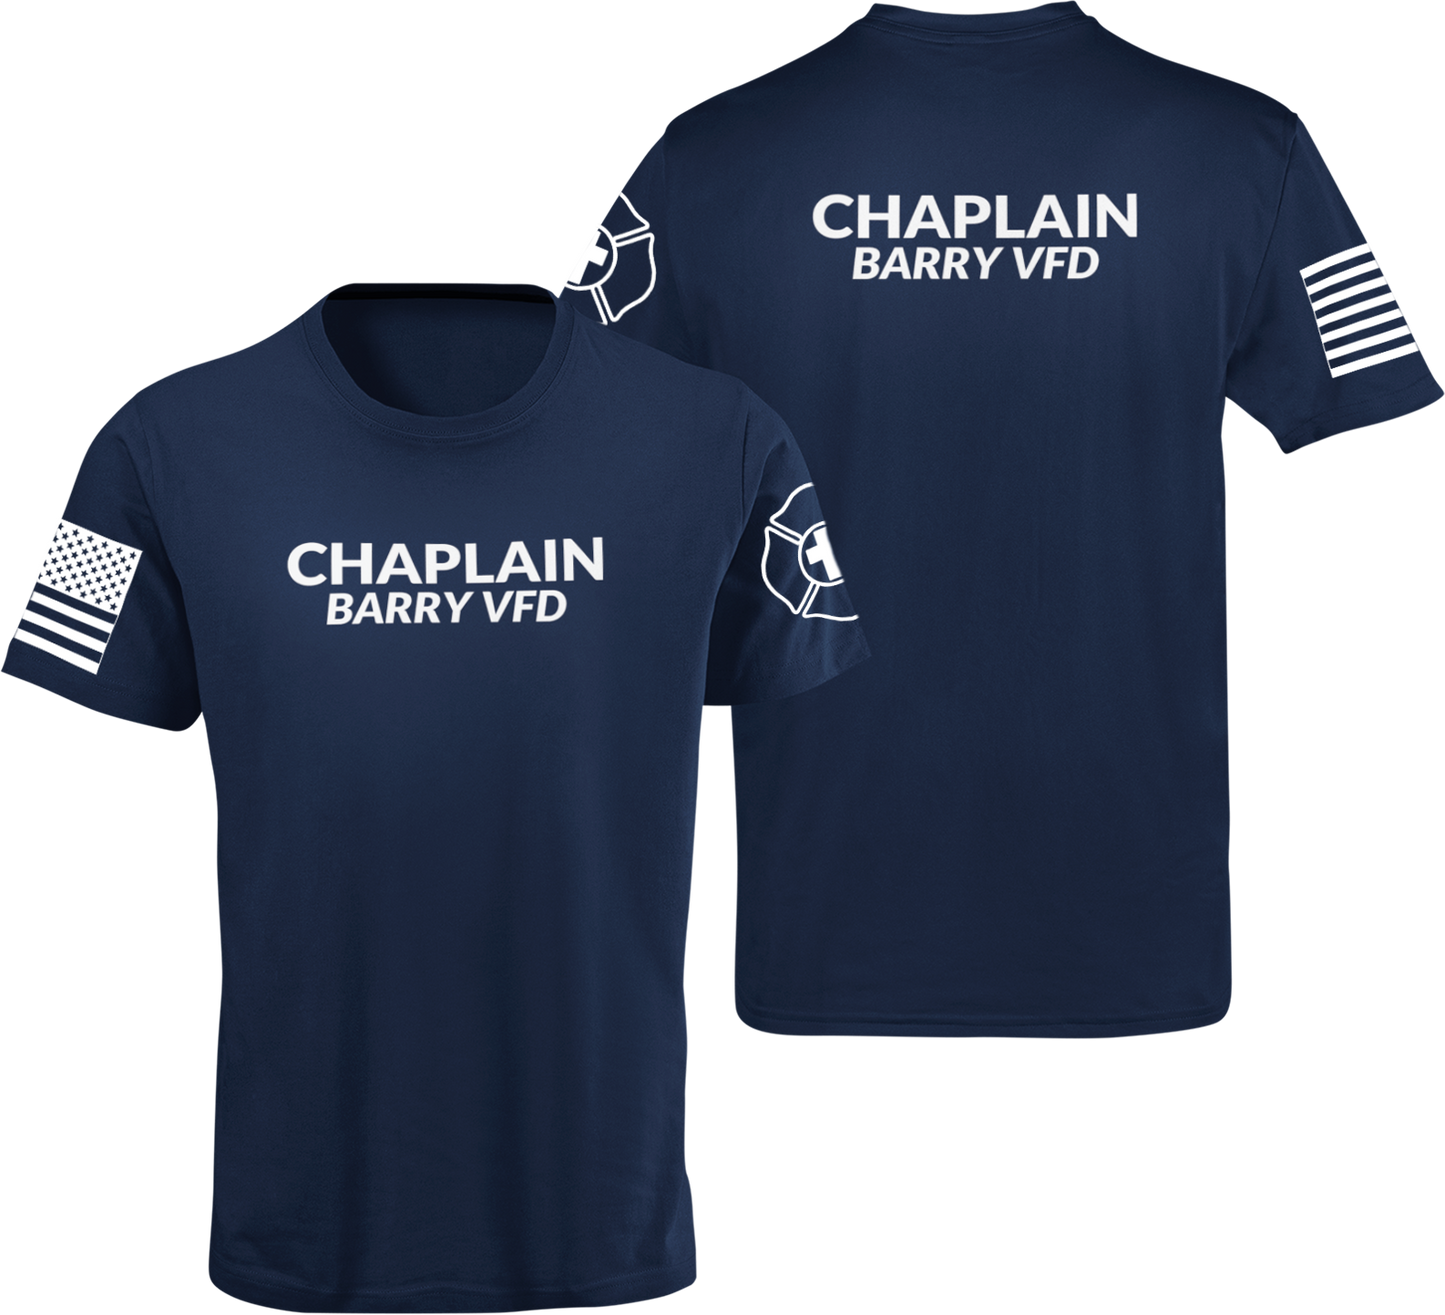 Chaplain T Shirt with Advancing US Flag and Cross on Sleeves - Cold Dinner Club